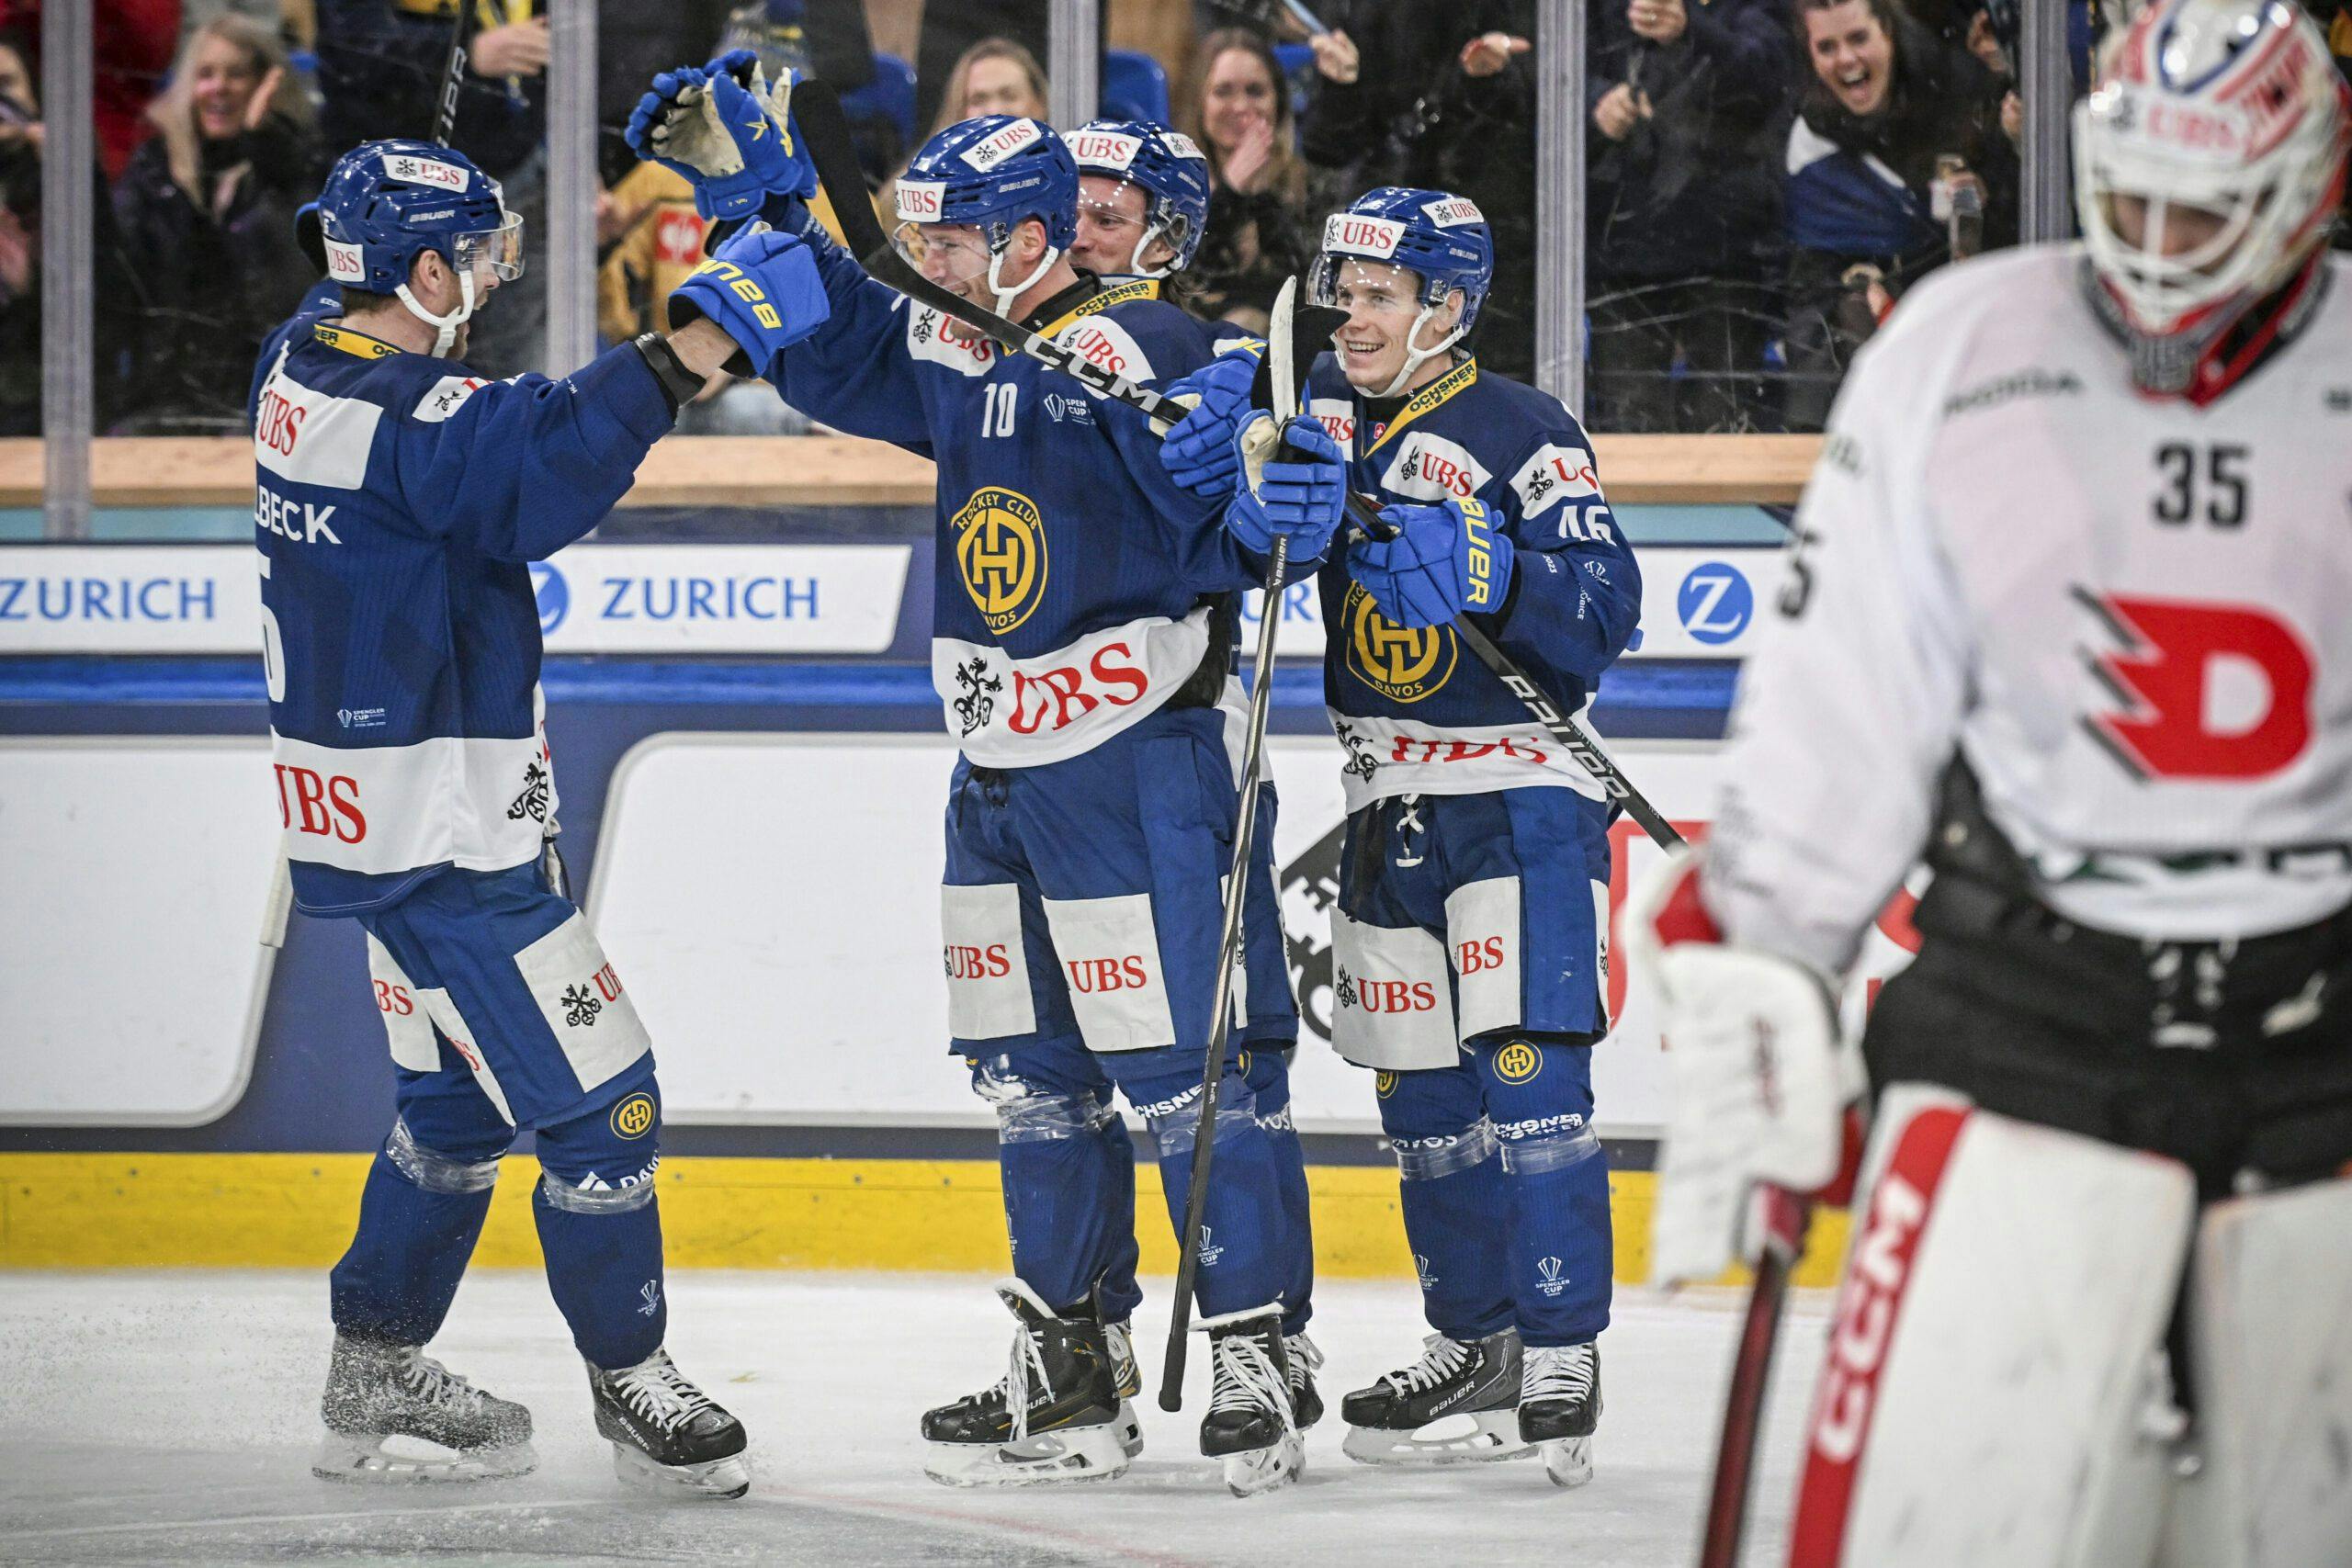 HC Davos wins 100th anniversary of the Spengler Cup